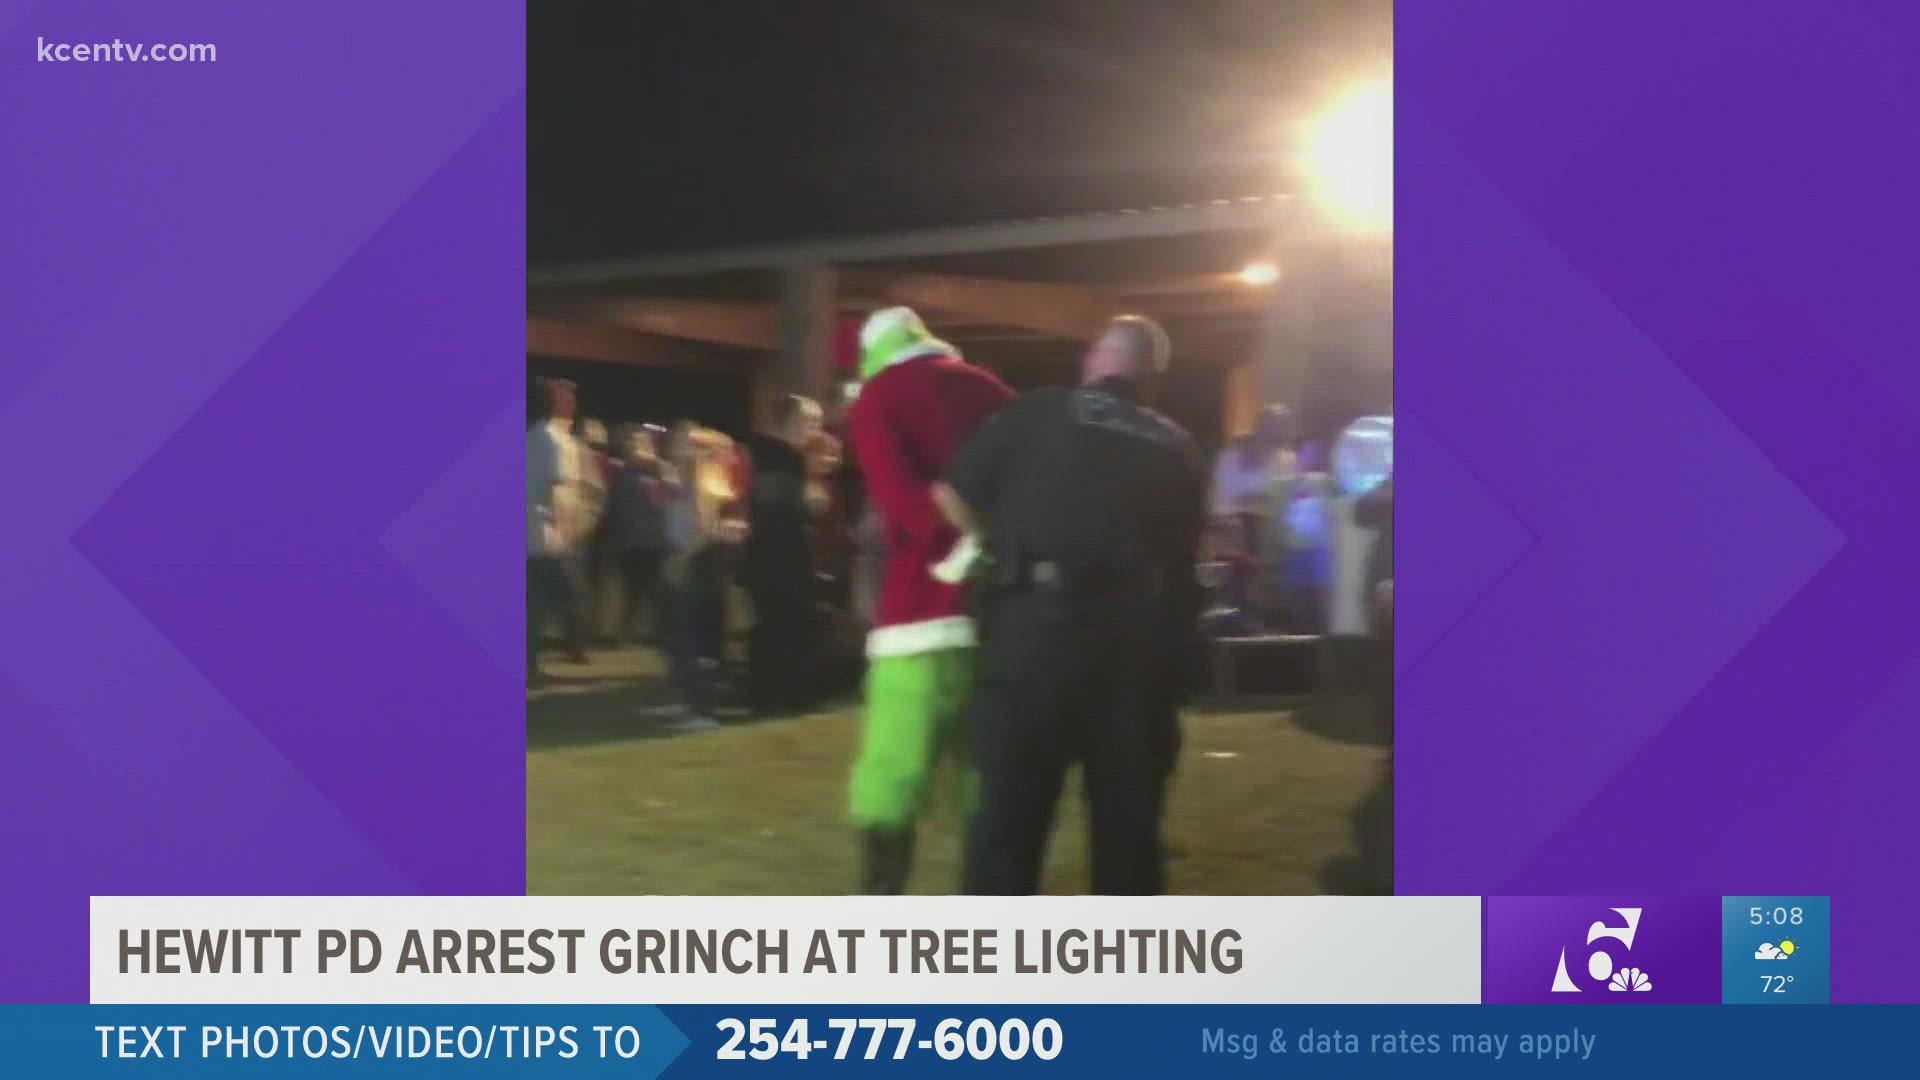 Hewitt PD captured video of the Grinch's arrest and were able to take him into custody without incident.